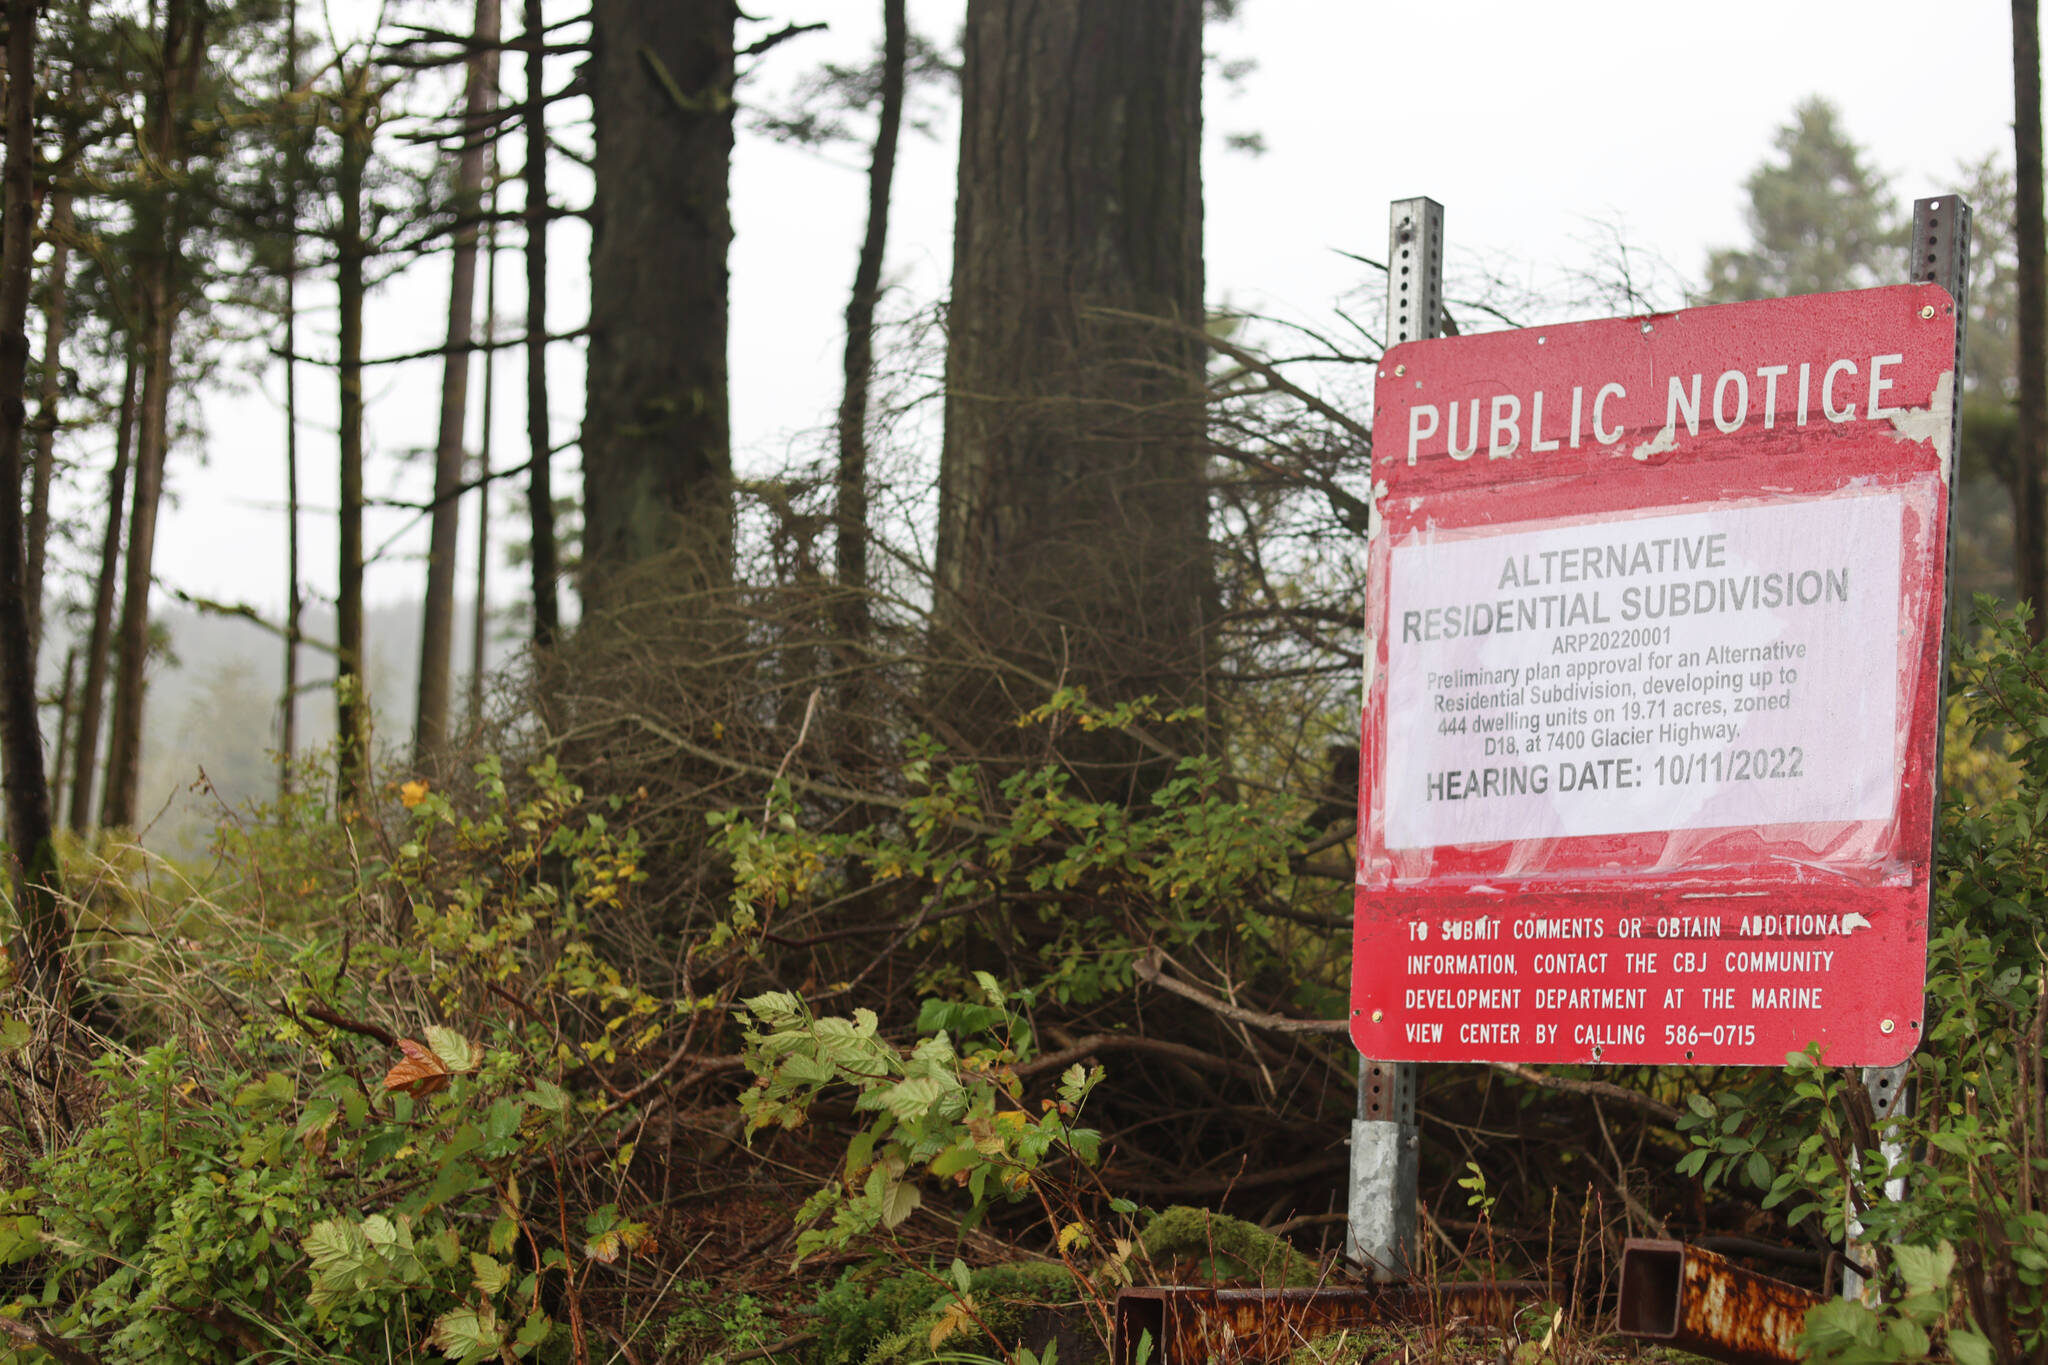 A sign stands at the site of a proposed 444-unit subdivision along the 7400 block of Glacier Highway in Juneau. (Jonson Kuhn / Juneau Empire)
Jonson Kuhn / Juneau Empire 
A sign stands at the site of a proposed 444-unit subdivision along the 7400 block of Glacier Highway in Juneau.